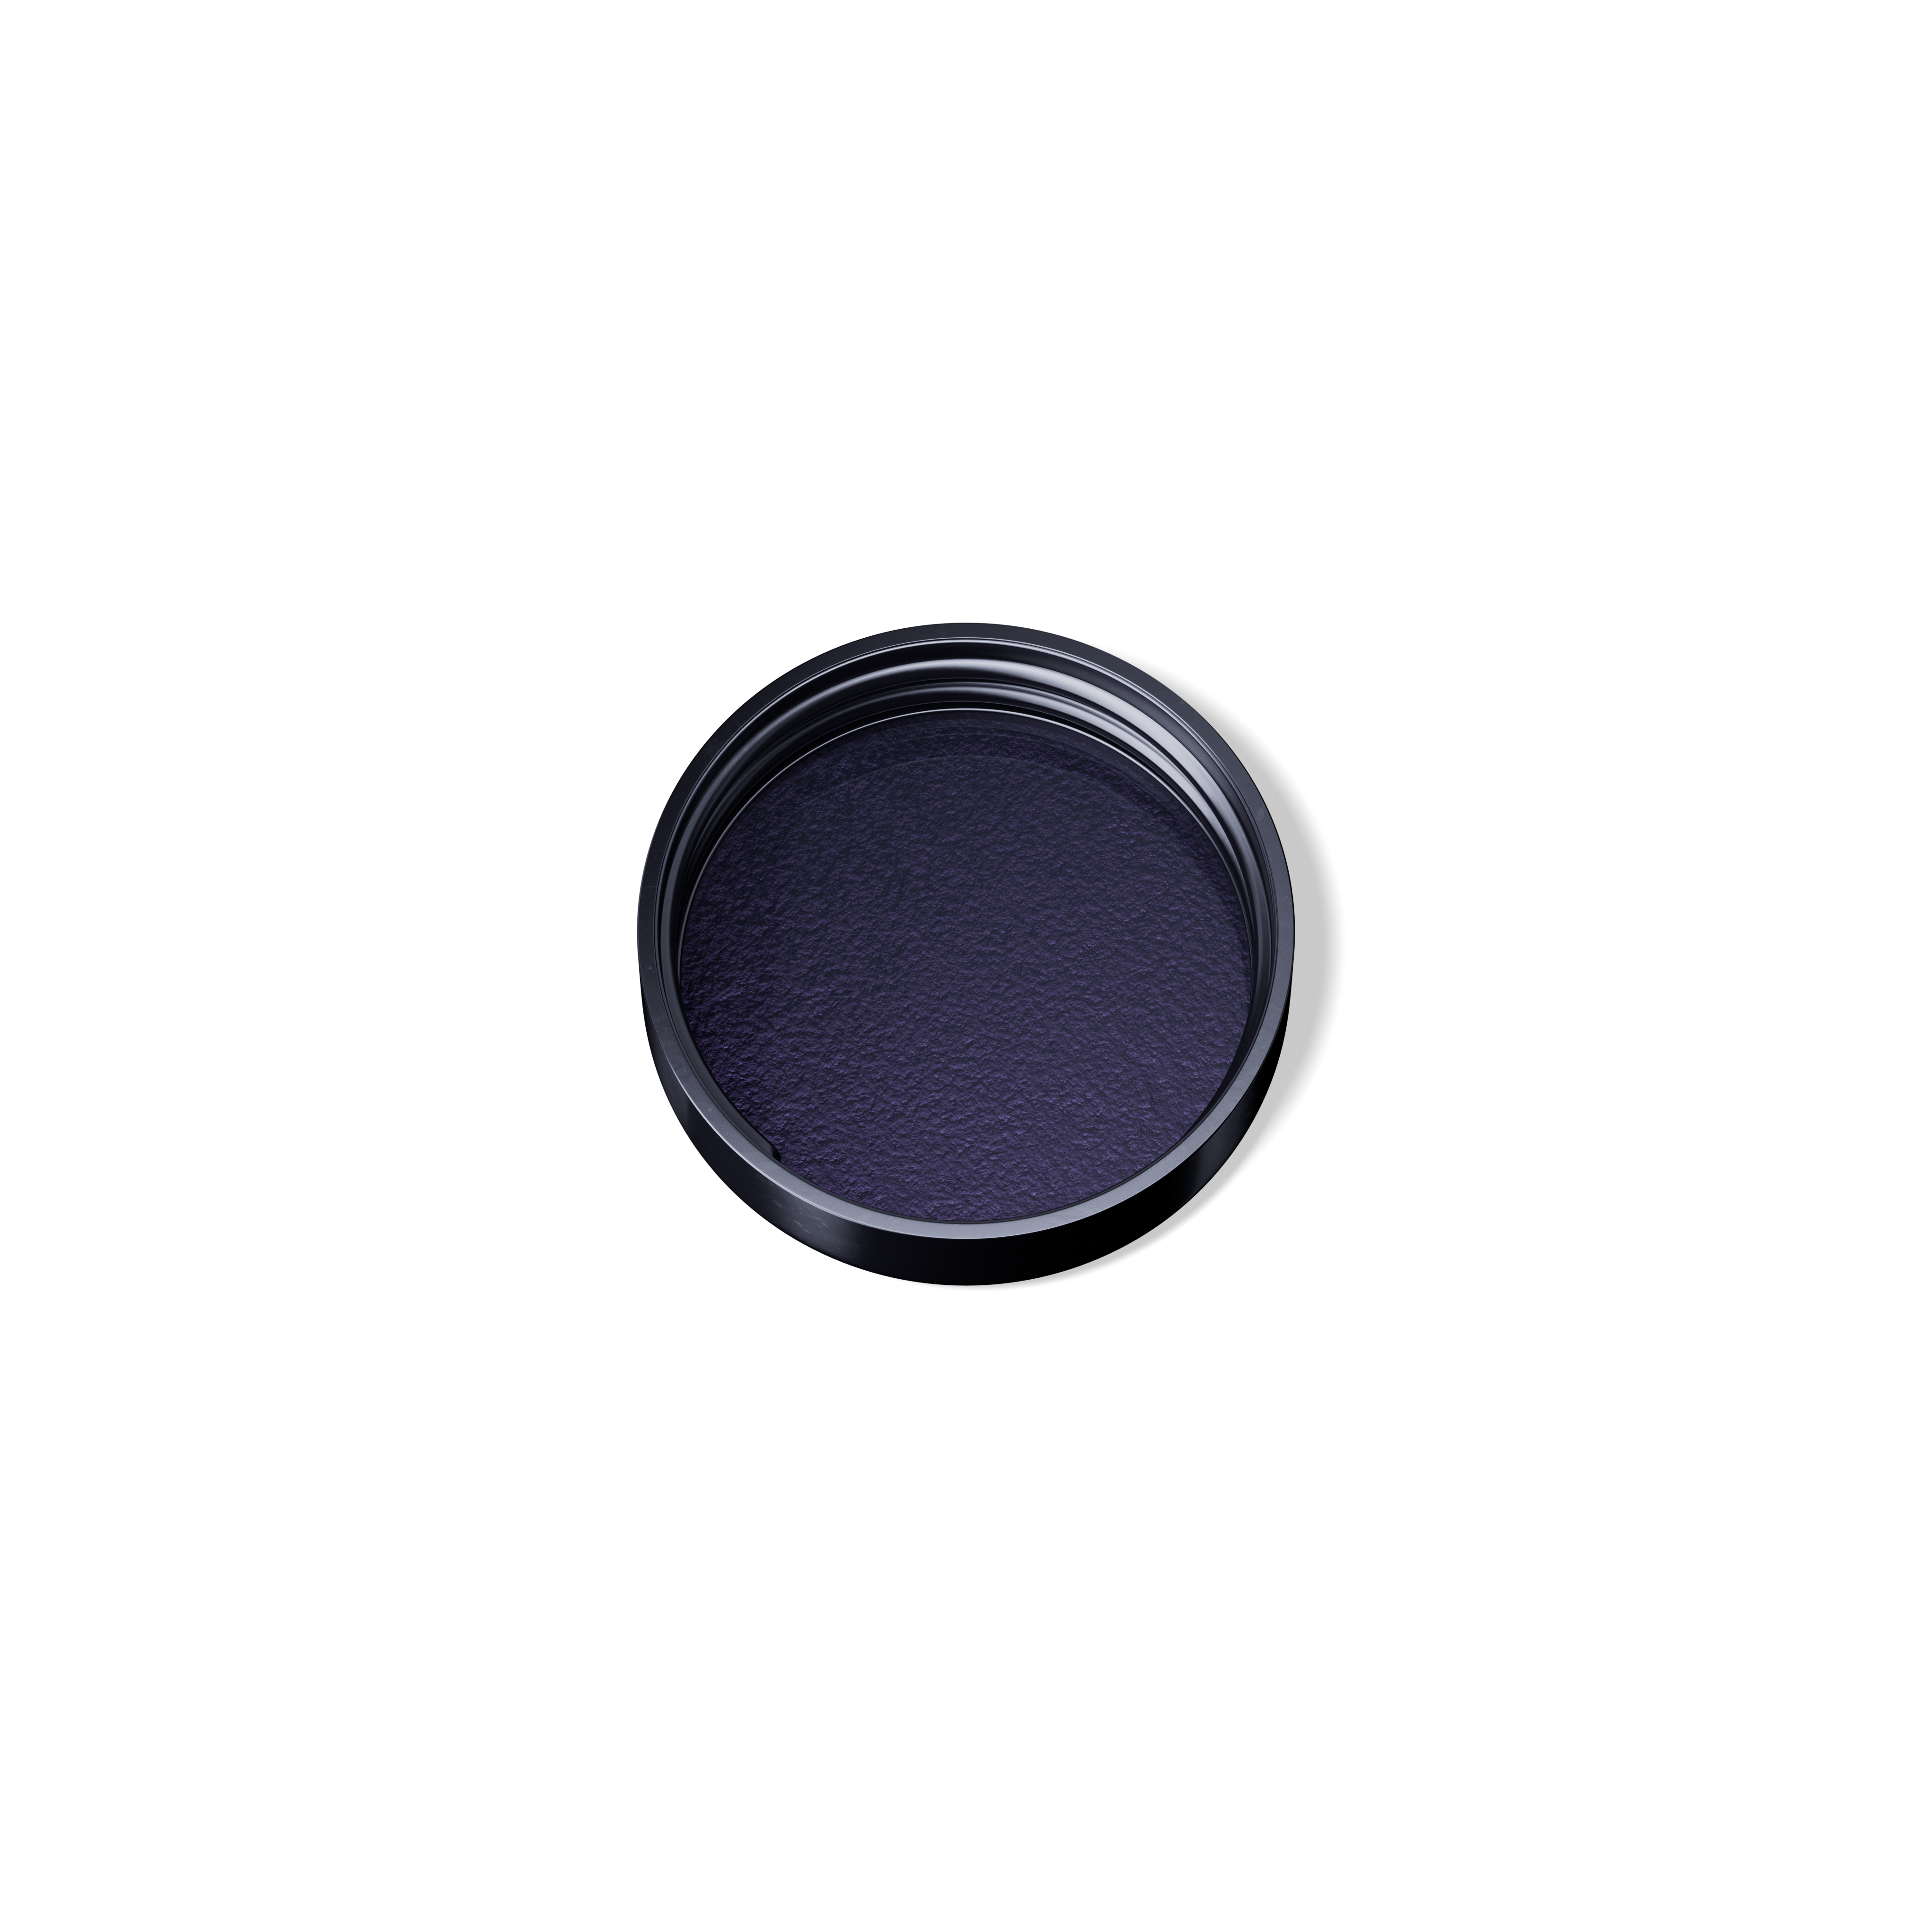 Lid Classic 38 special thread, UREA, black, glossy finish, violet Phan inlay (Ceres 15)